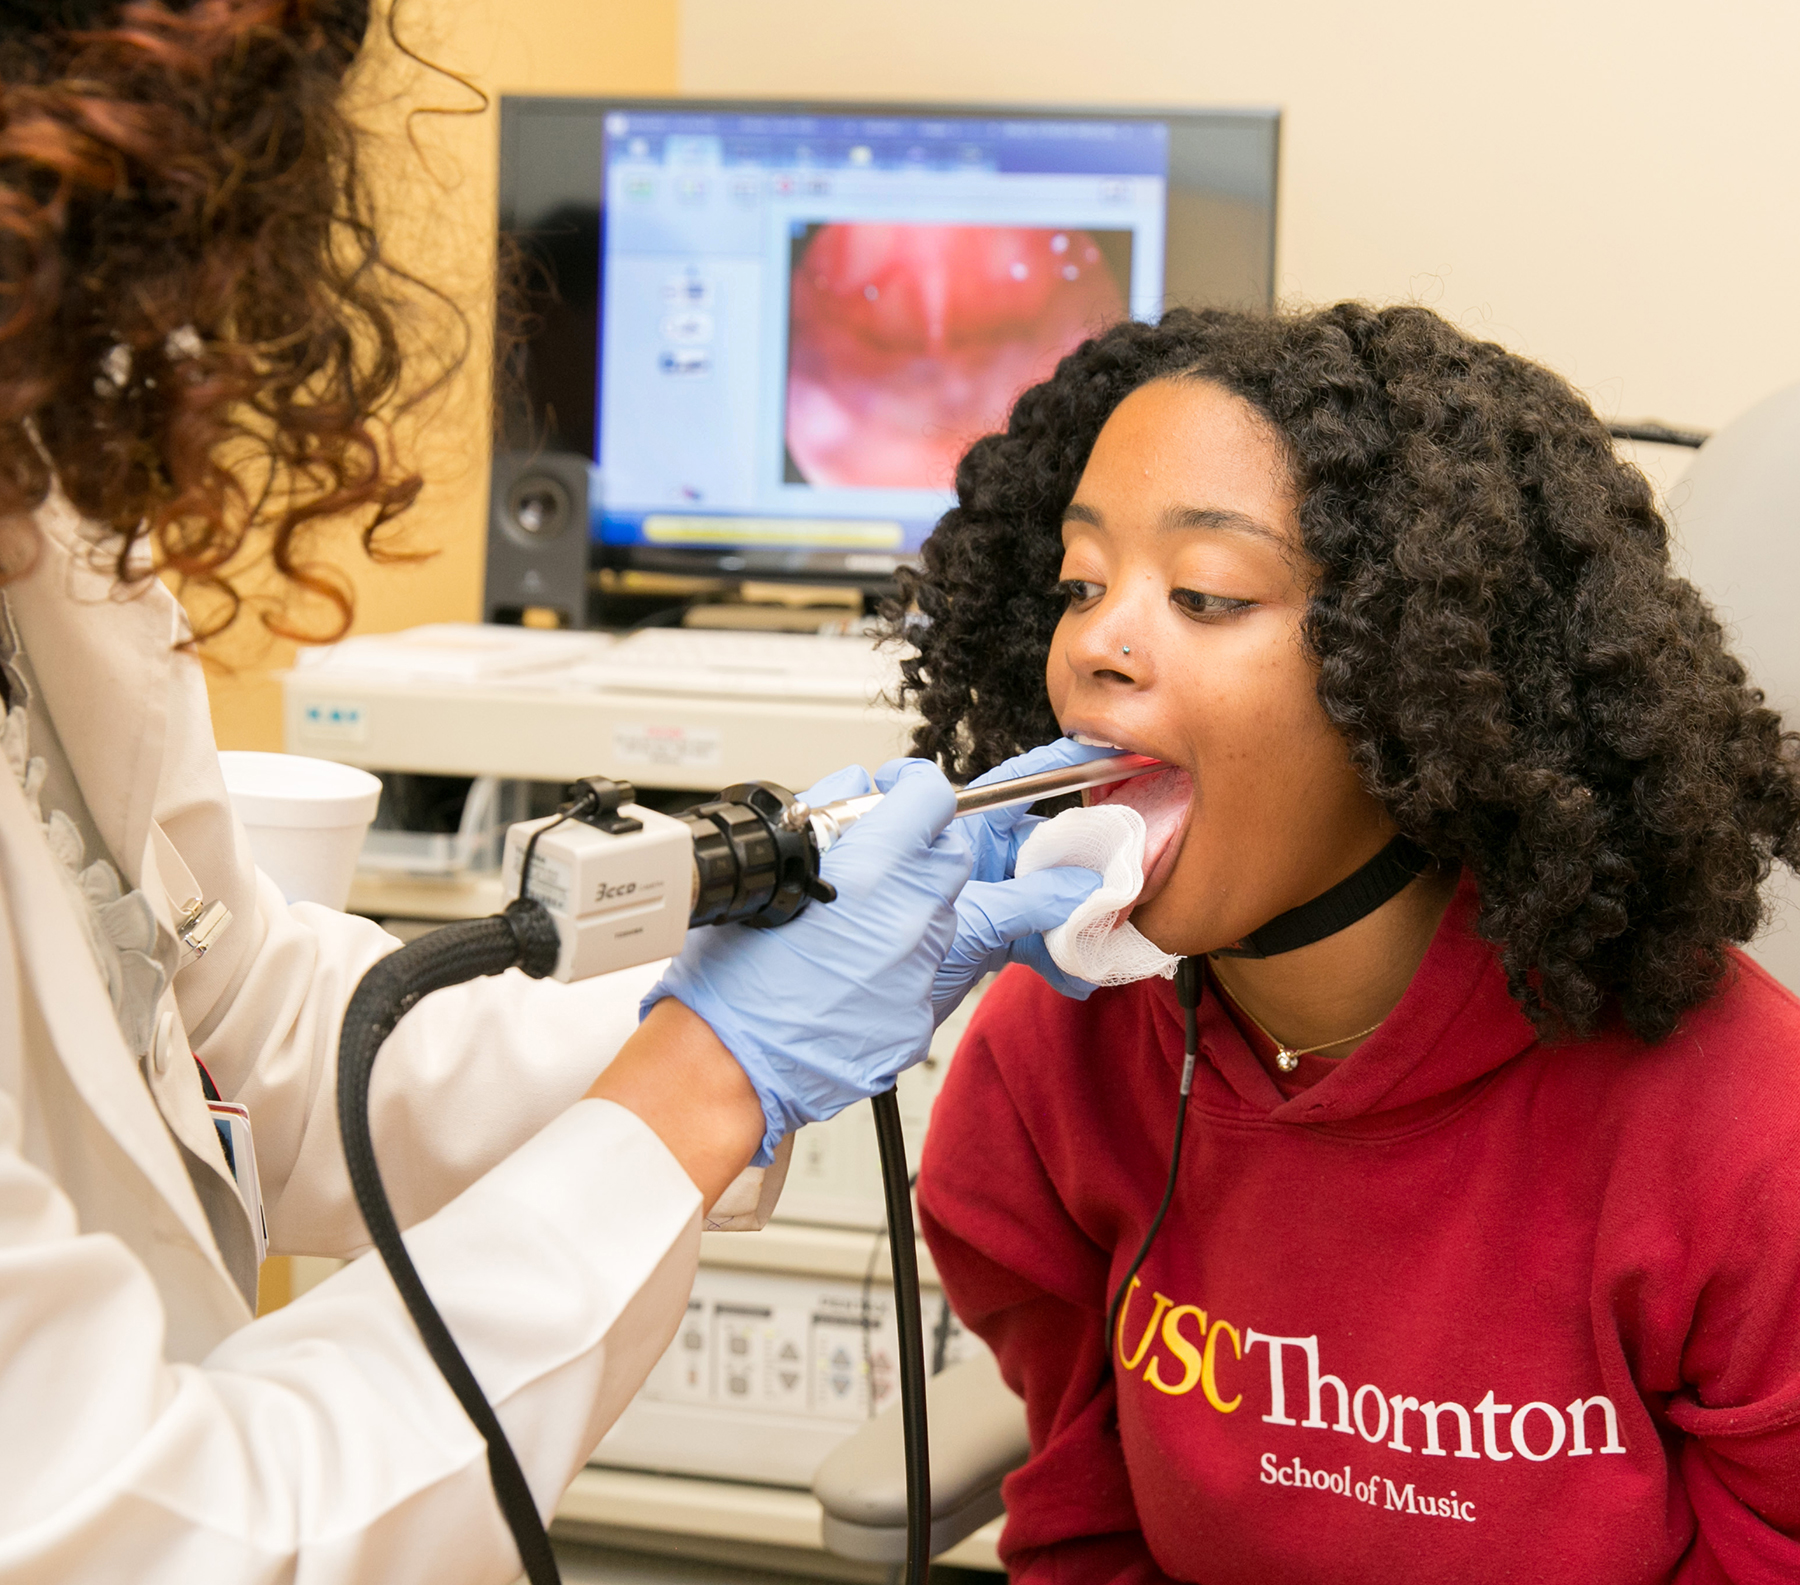 Doctor examines a female patient's vocal cords with an endoscope